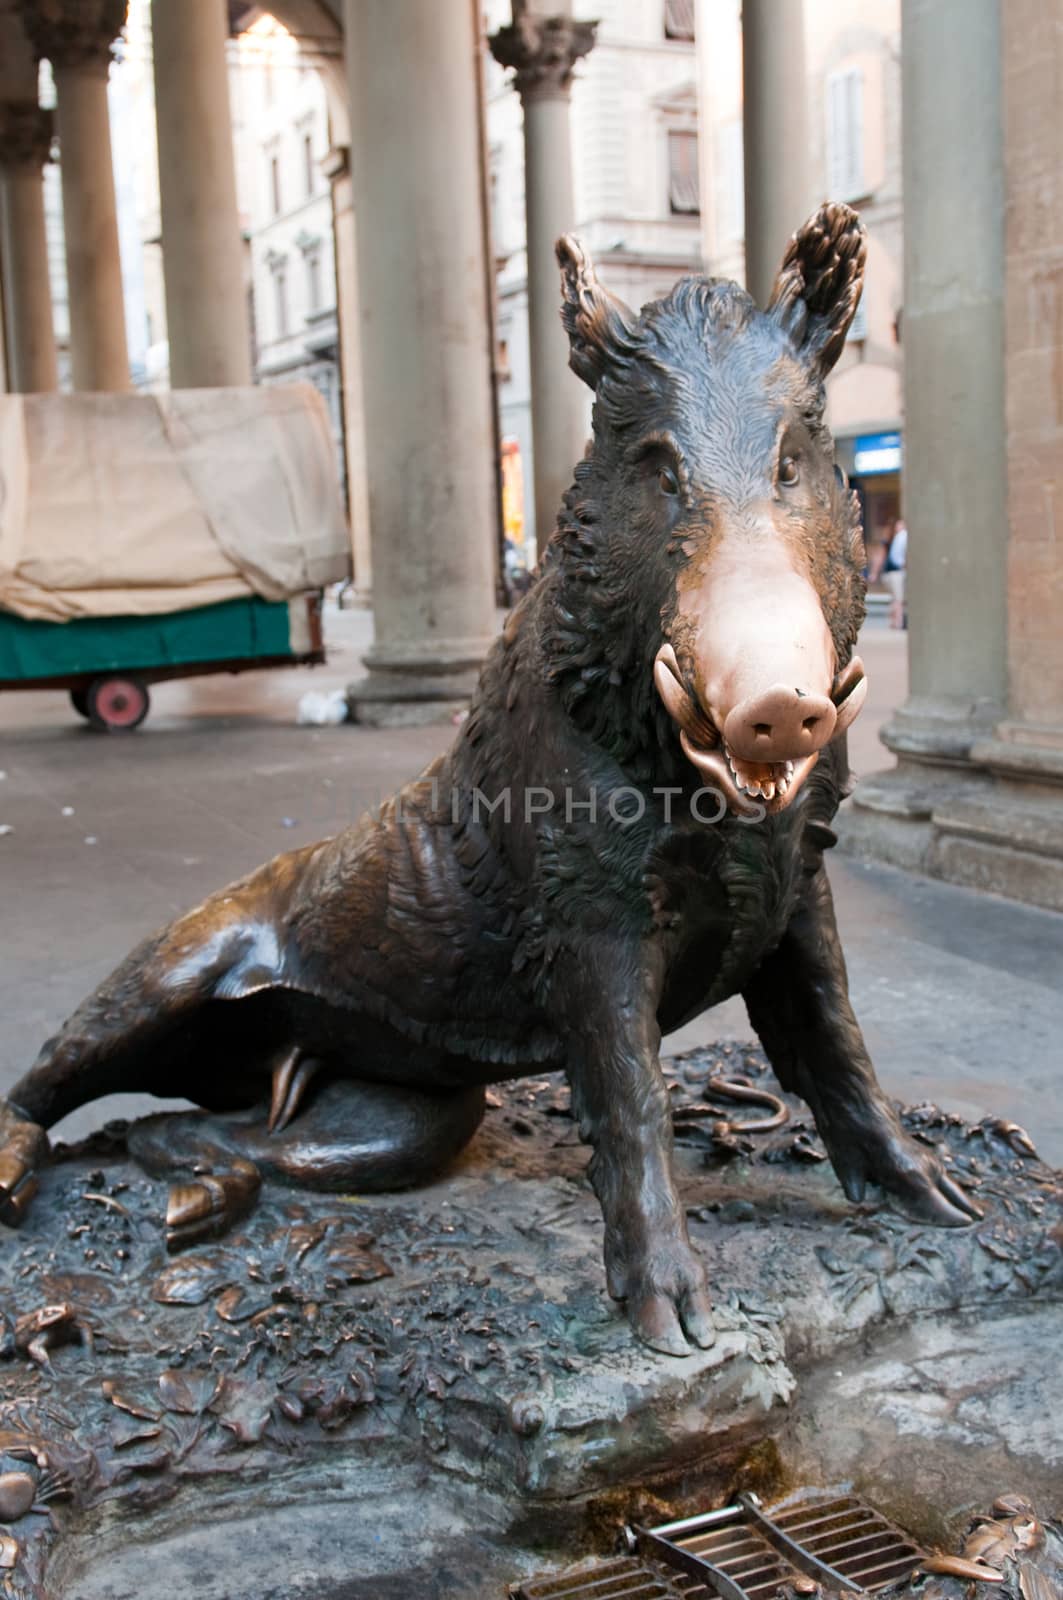 Il Porcellino (Italian "piglet") is the local Florentine nickname for the bronze fountain of a boar in Florence, Tuscany, Italy. by lexan